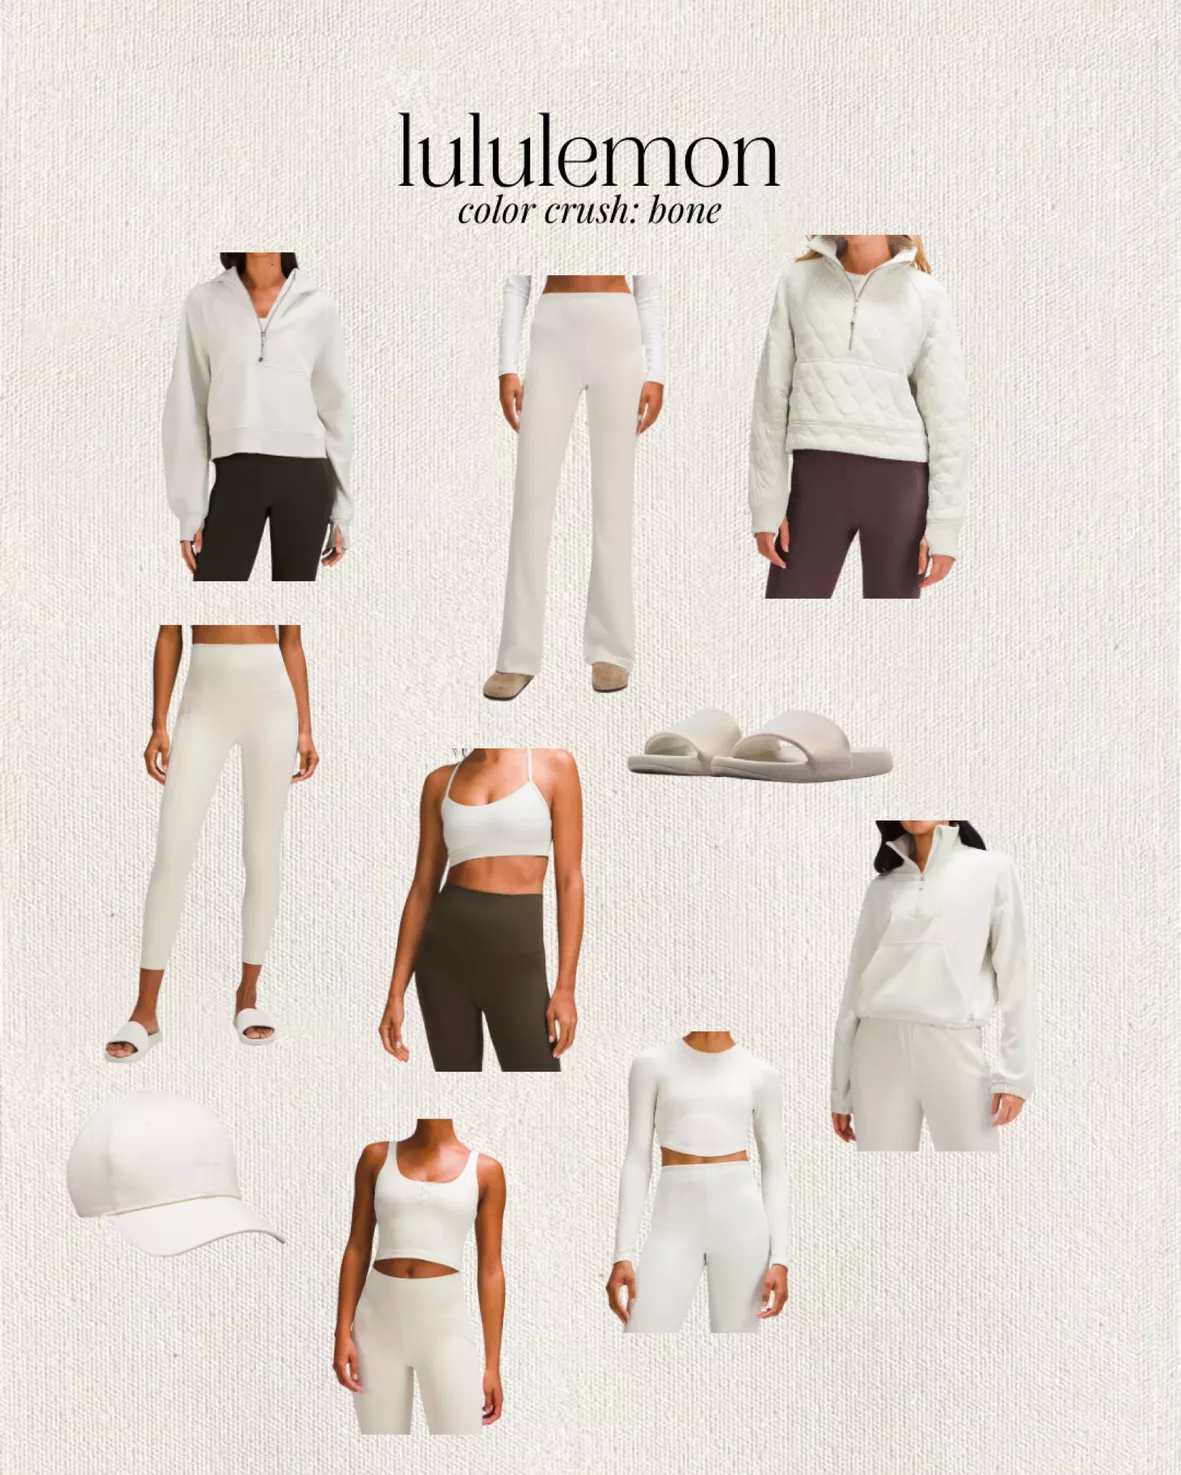 The newest lululemon Scuba is here….in bone! Available at both